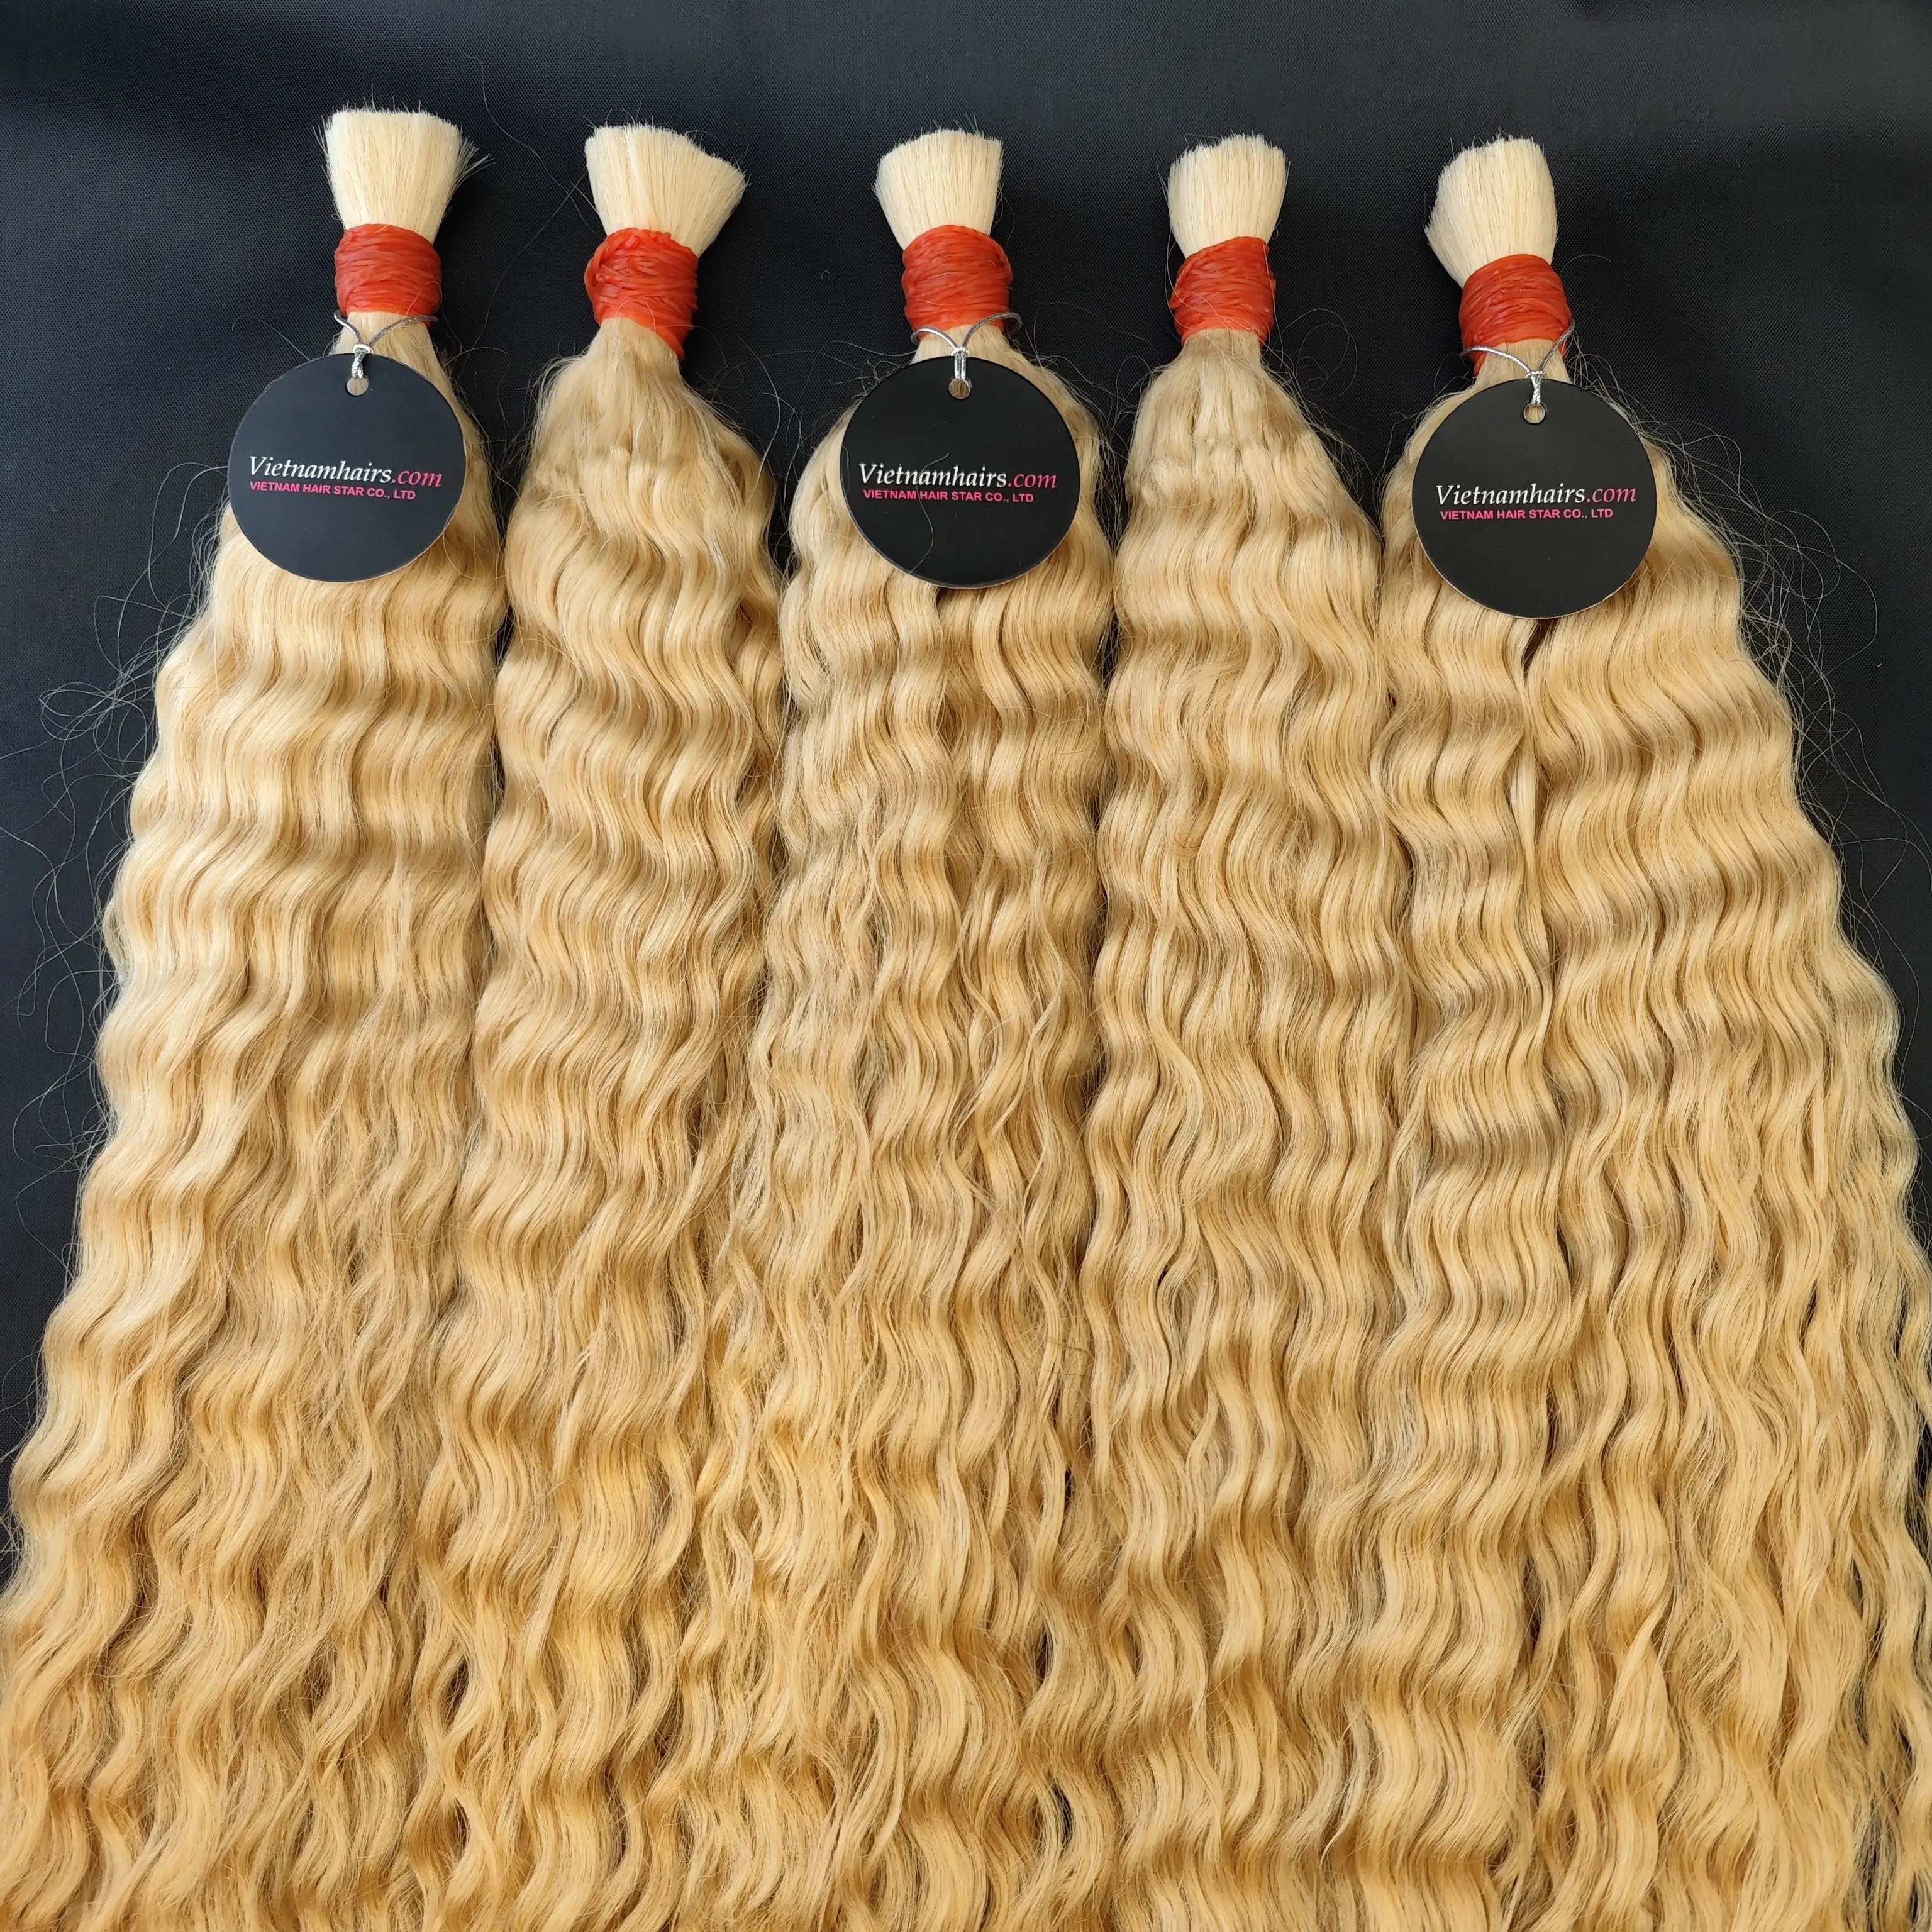 [TOP] Best factory wholesale price wavy/curly hair blonde color no shedding vietnamese remy hair extensions